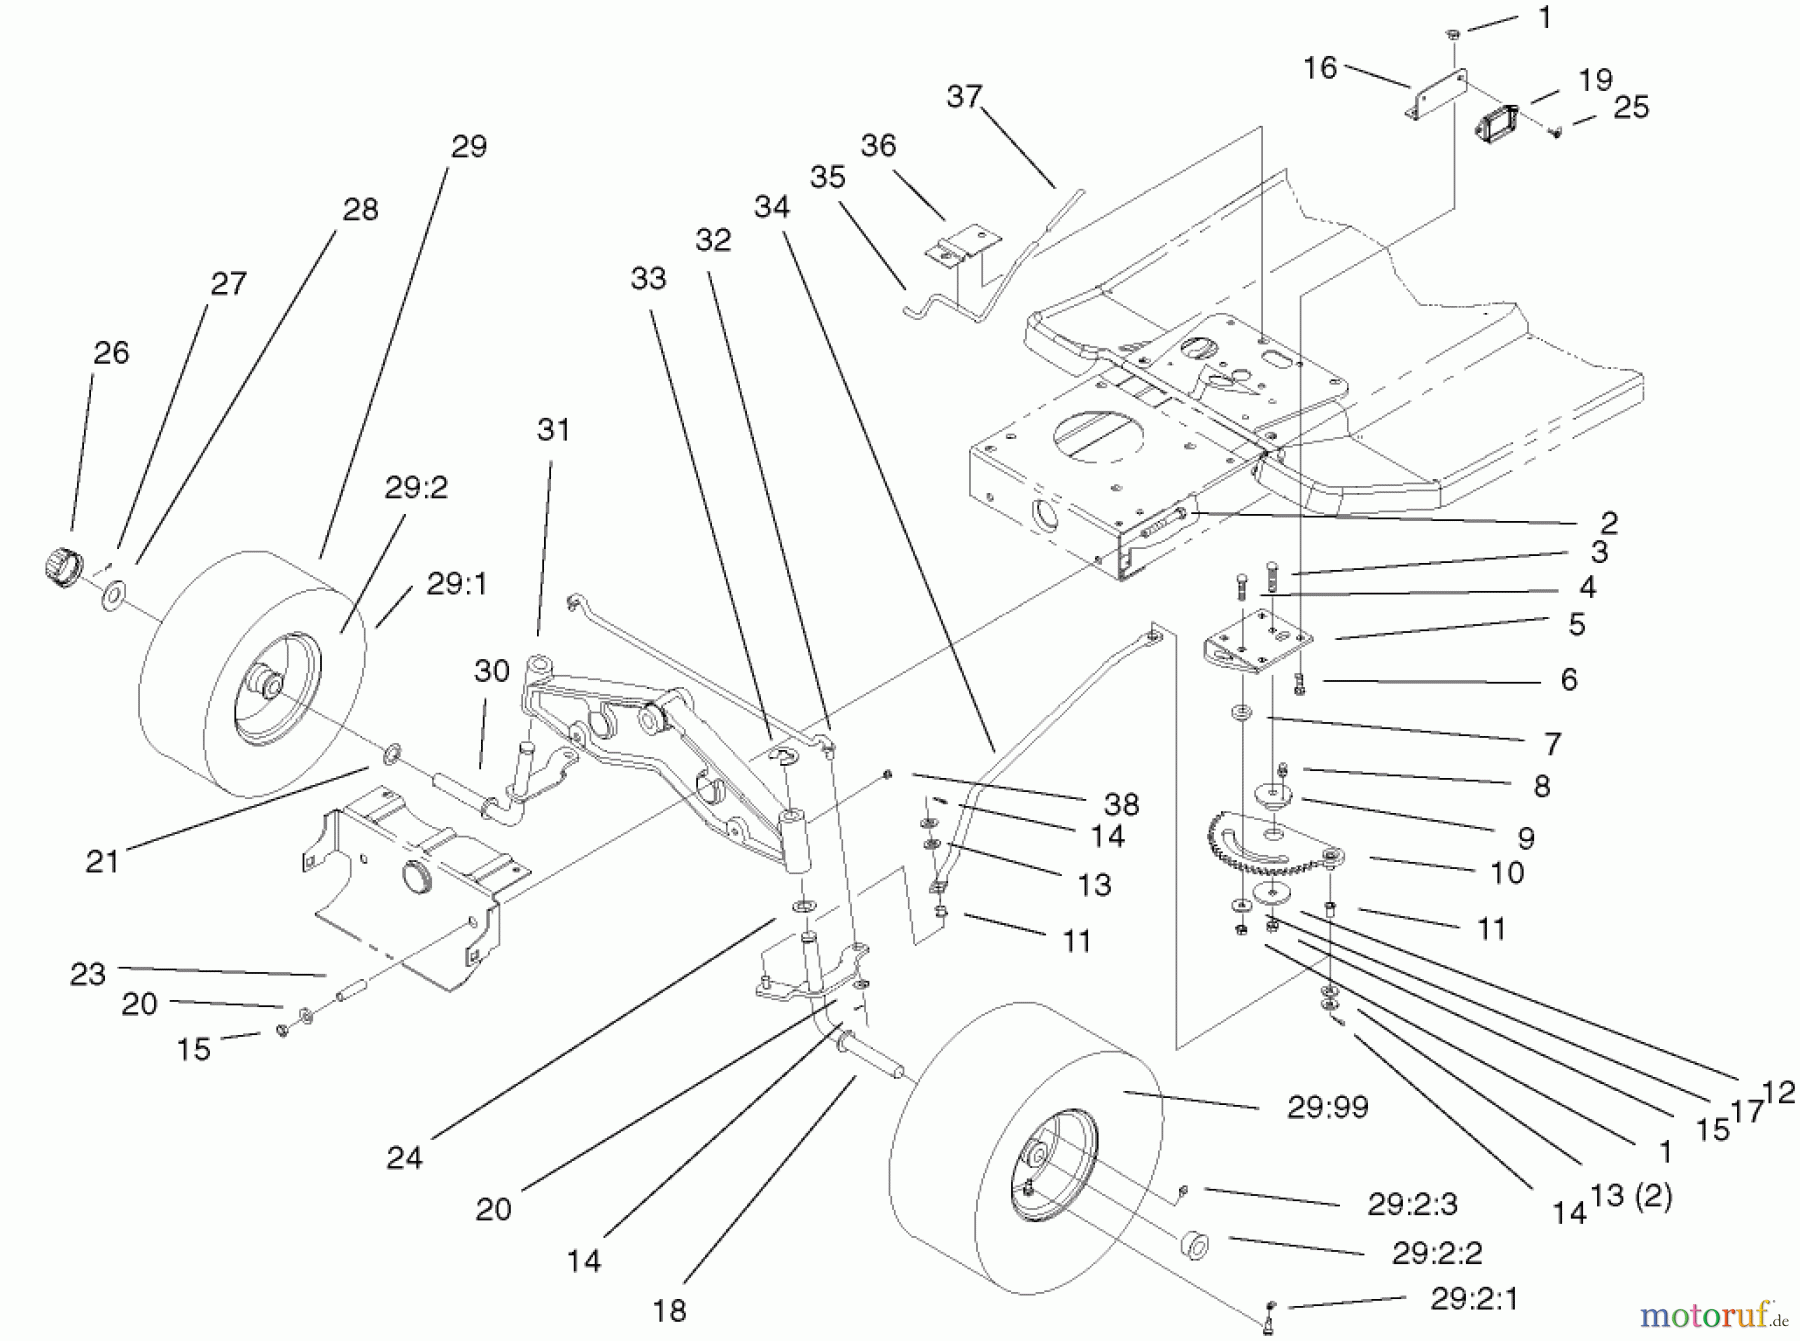  Toro Neu Mowers, Lawn & Garden Tractor Seite 1 77104 (16-38H) - Toro 16-38H Lawn Tractor, 2000 (200000001-200999999) STEERING COMPONENTS ASSEMBLY